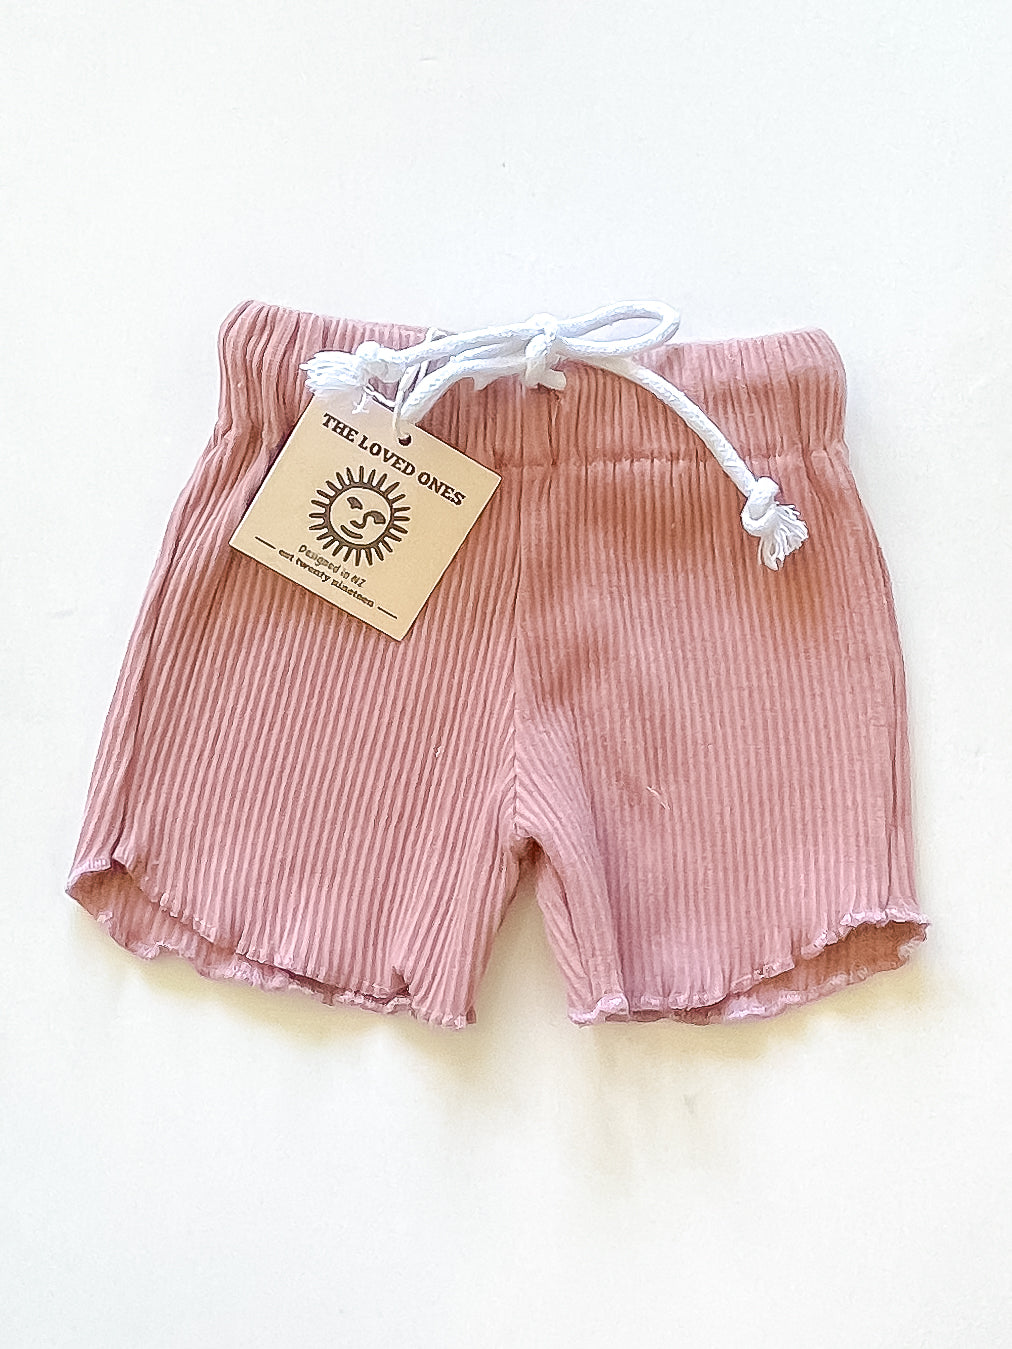 BNWT The Loved Ones ribbed drawstring shorts (3-6m)